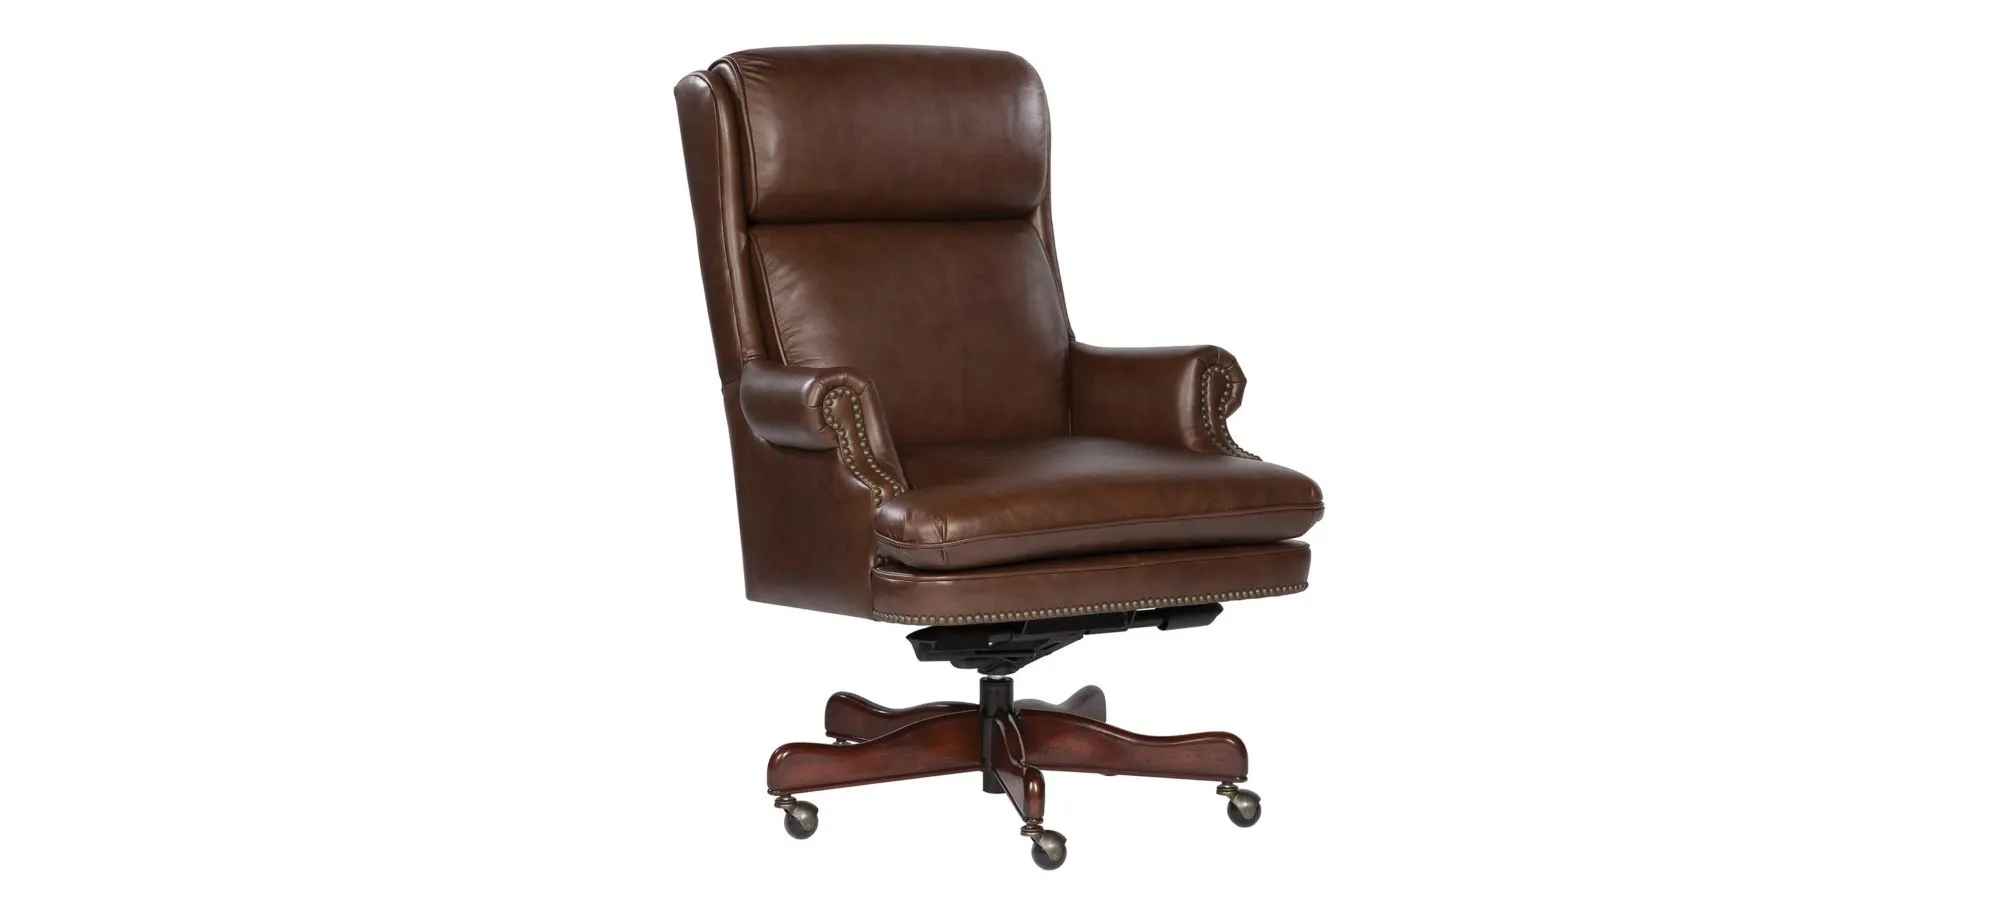 Hekman Executive Office Chair in SPECIAL RESERVE by Hekman Furniture Company